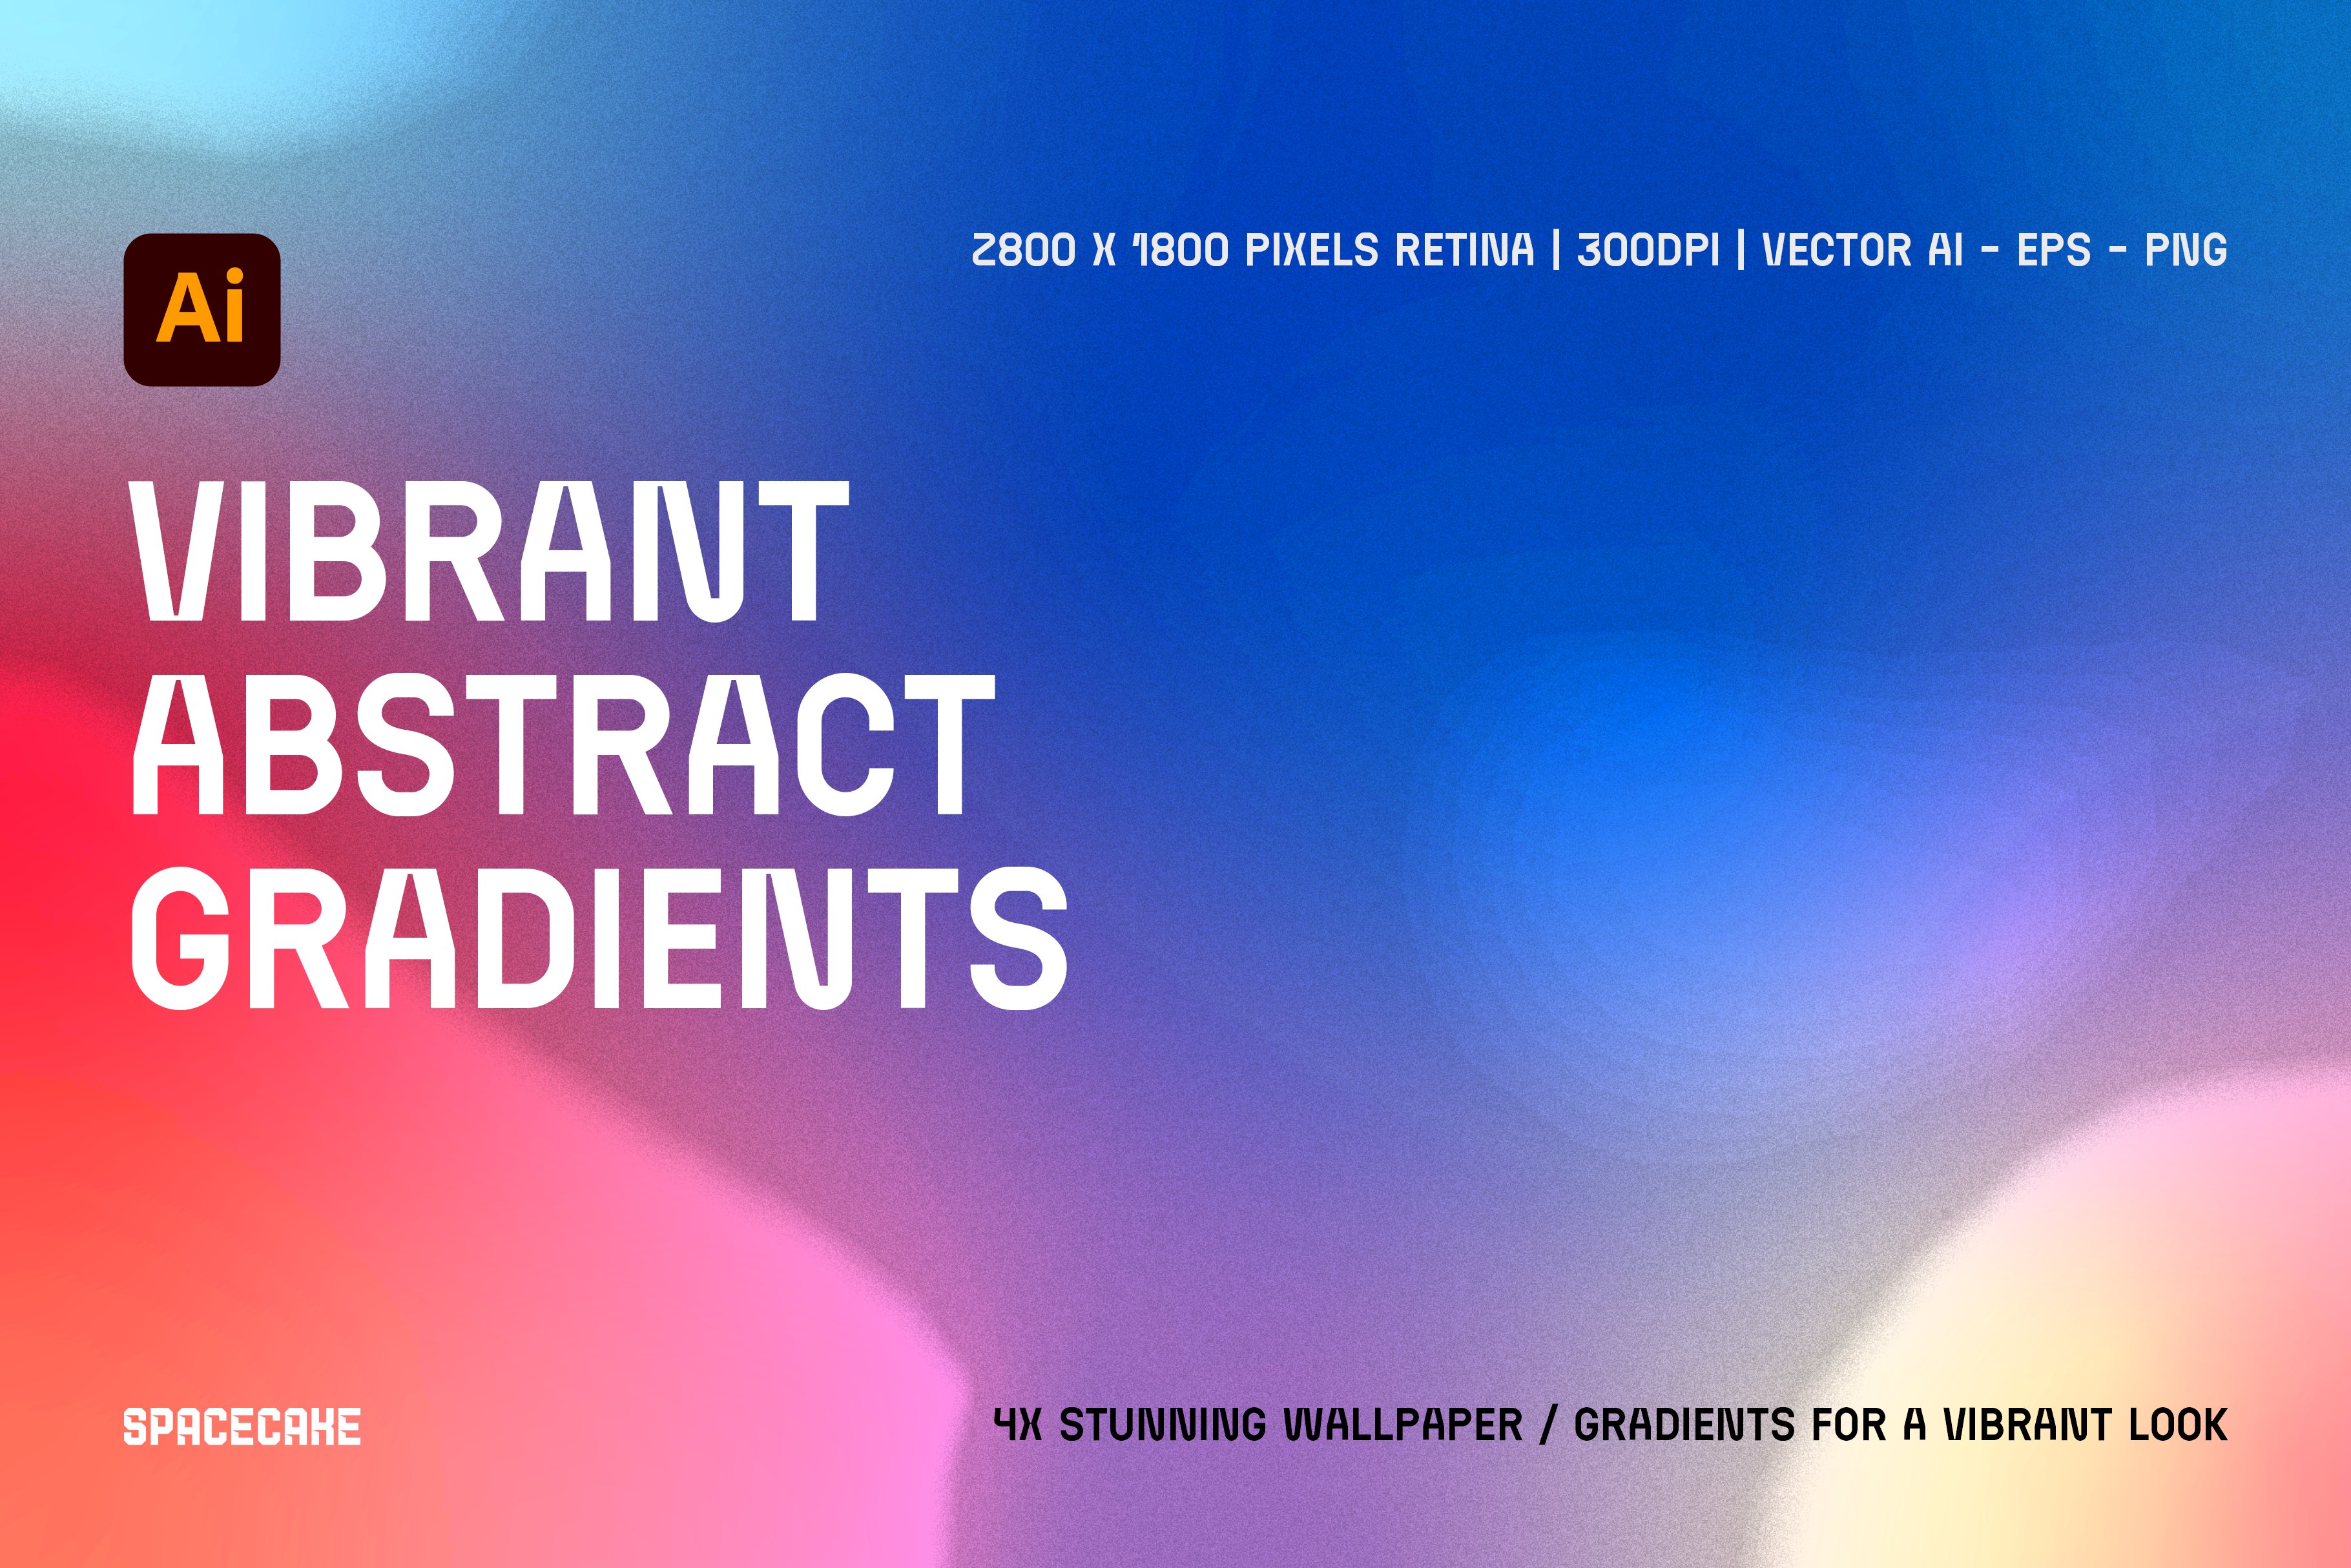 Vibrant Abstract Gradient Wallpaperscover image.